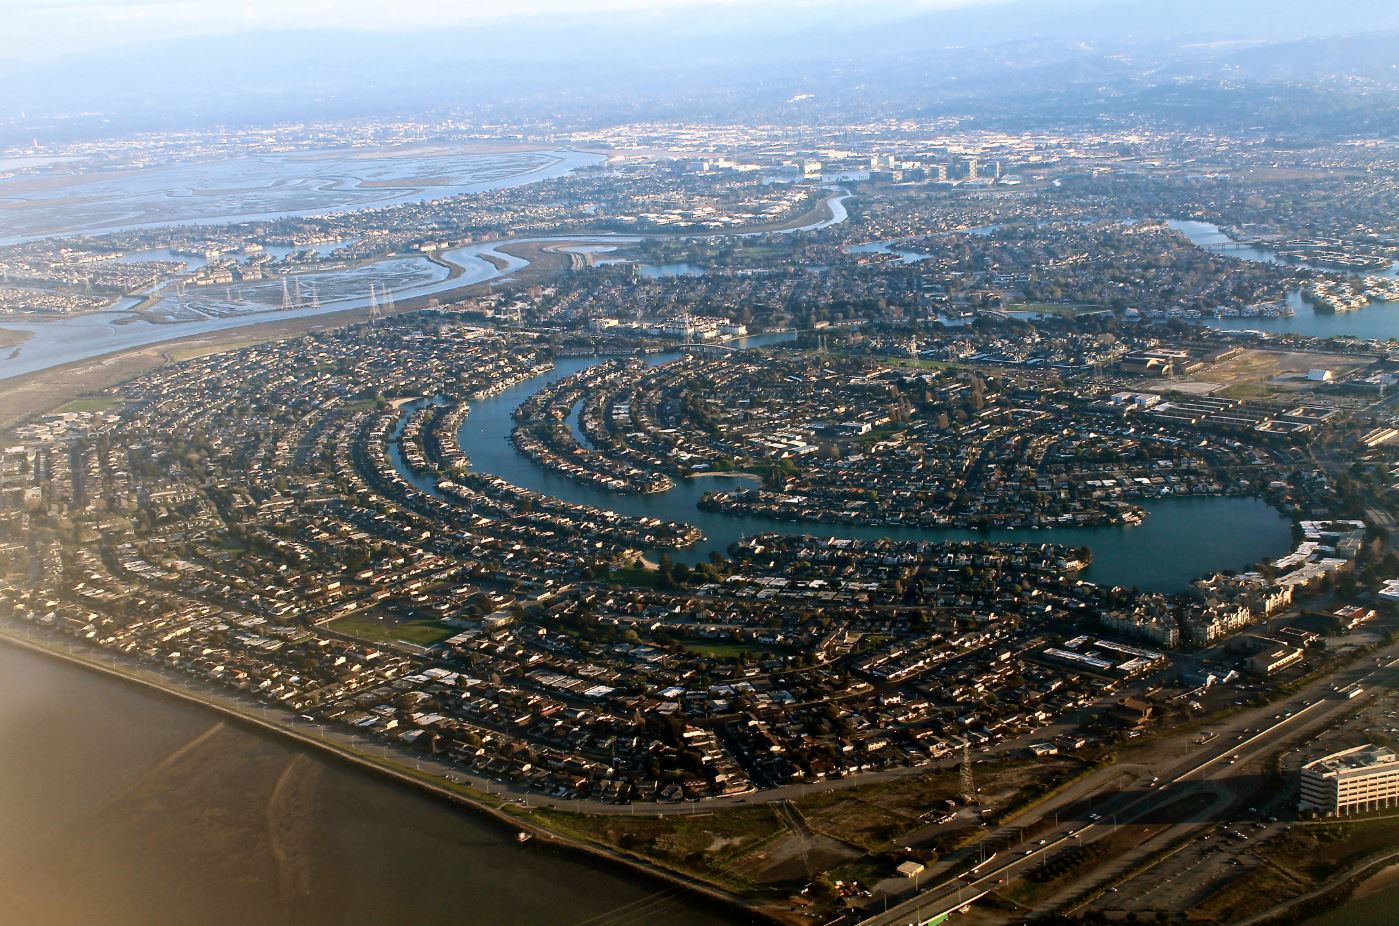 Silicon Valley from above.